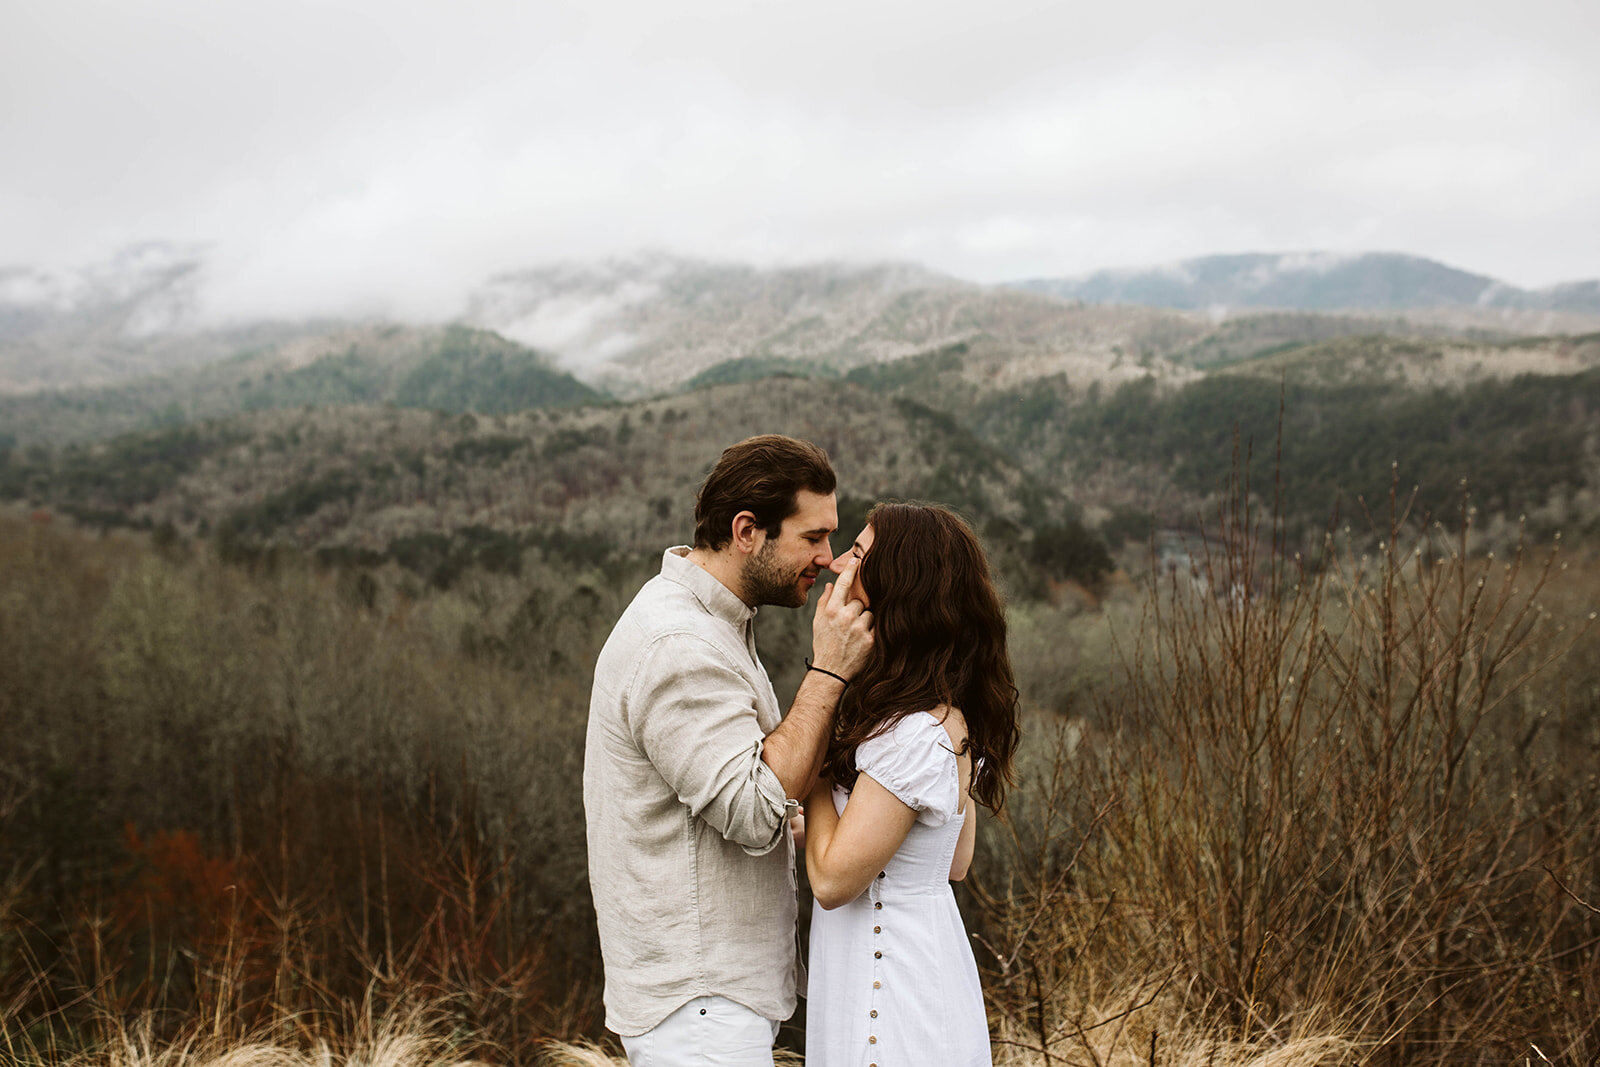 adventure-engagement-in-the-great-smoky-mountains-chattanooga-elopement-photographer5Y6A5362_websize.jpg